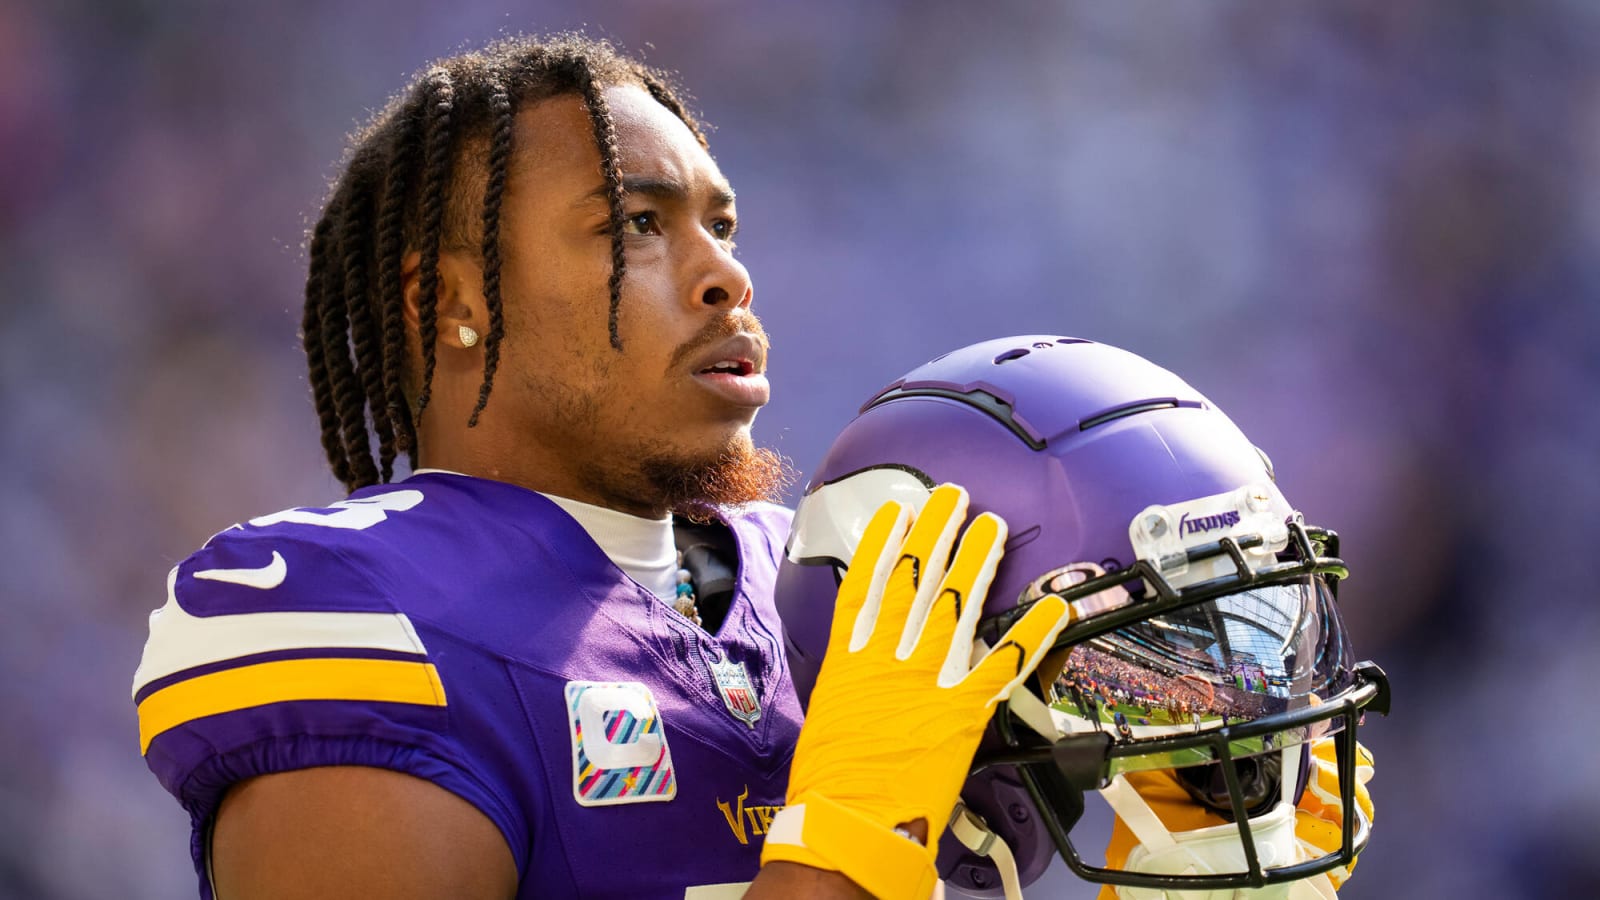 Minnesota Vikings Fans Despondent Over Losing WR, QB For At Least 4 Games